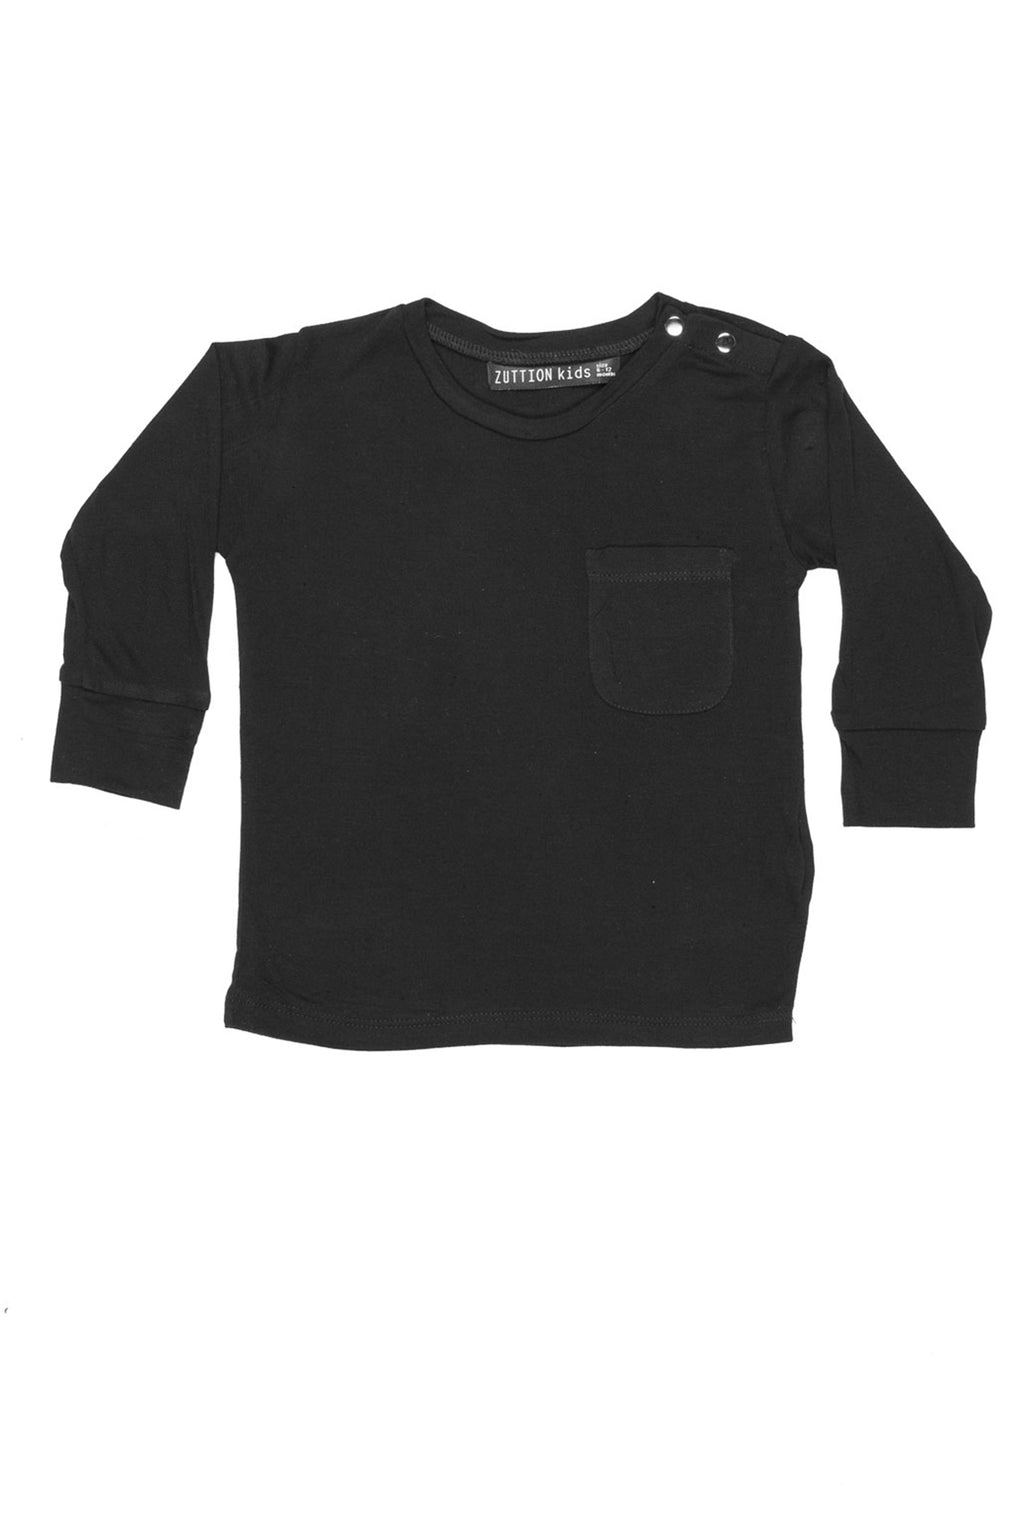 Baby Long Sleeve Tee Black - Zuttion